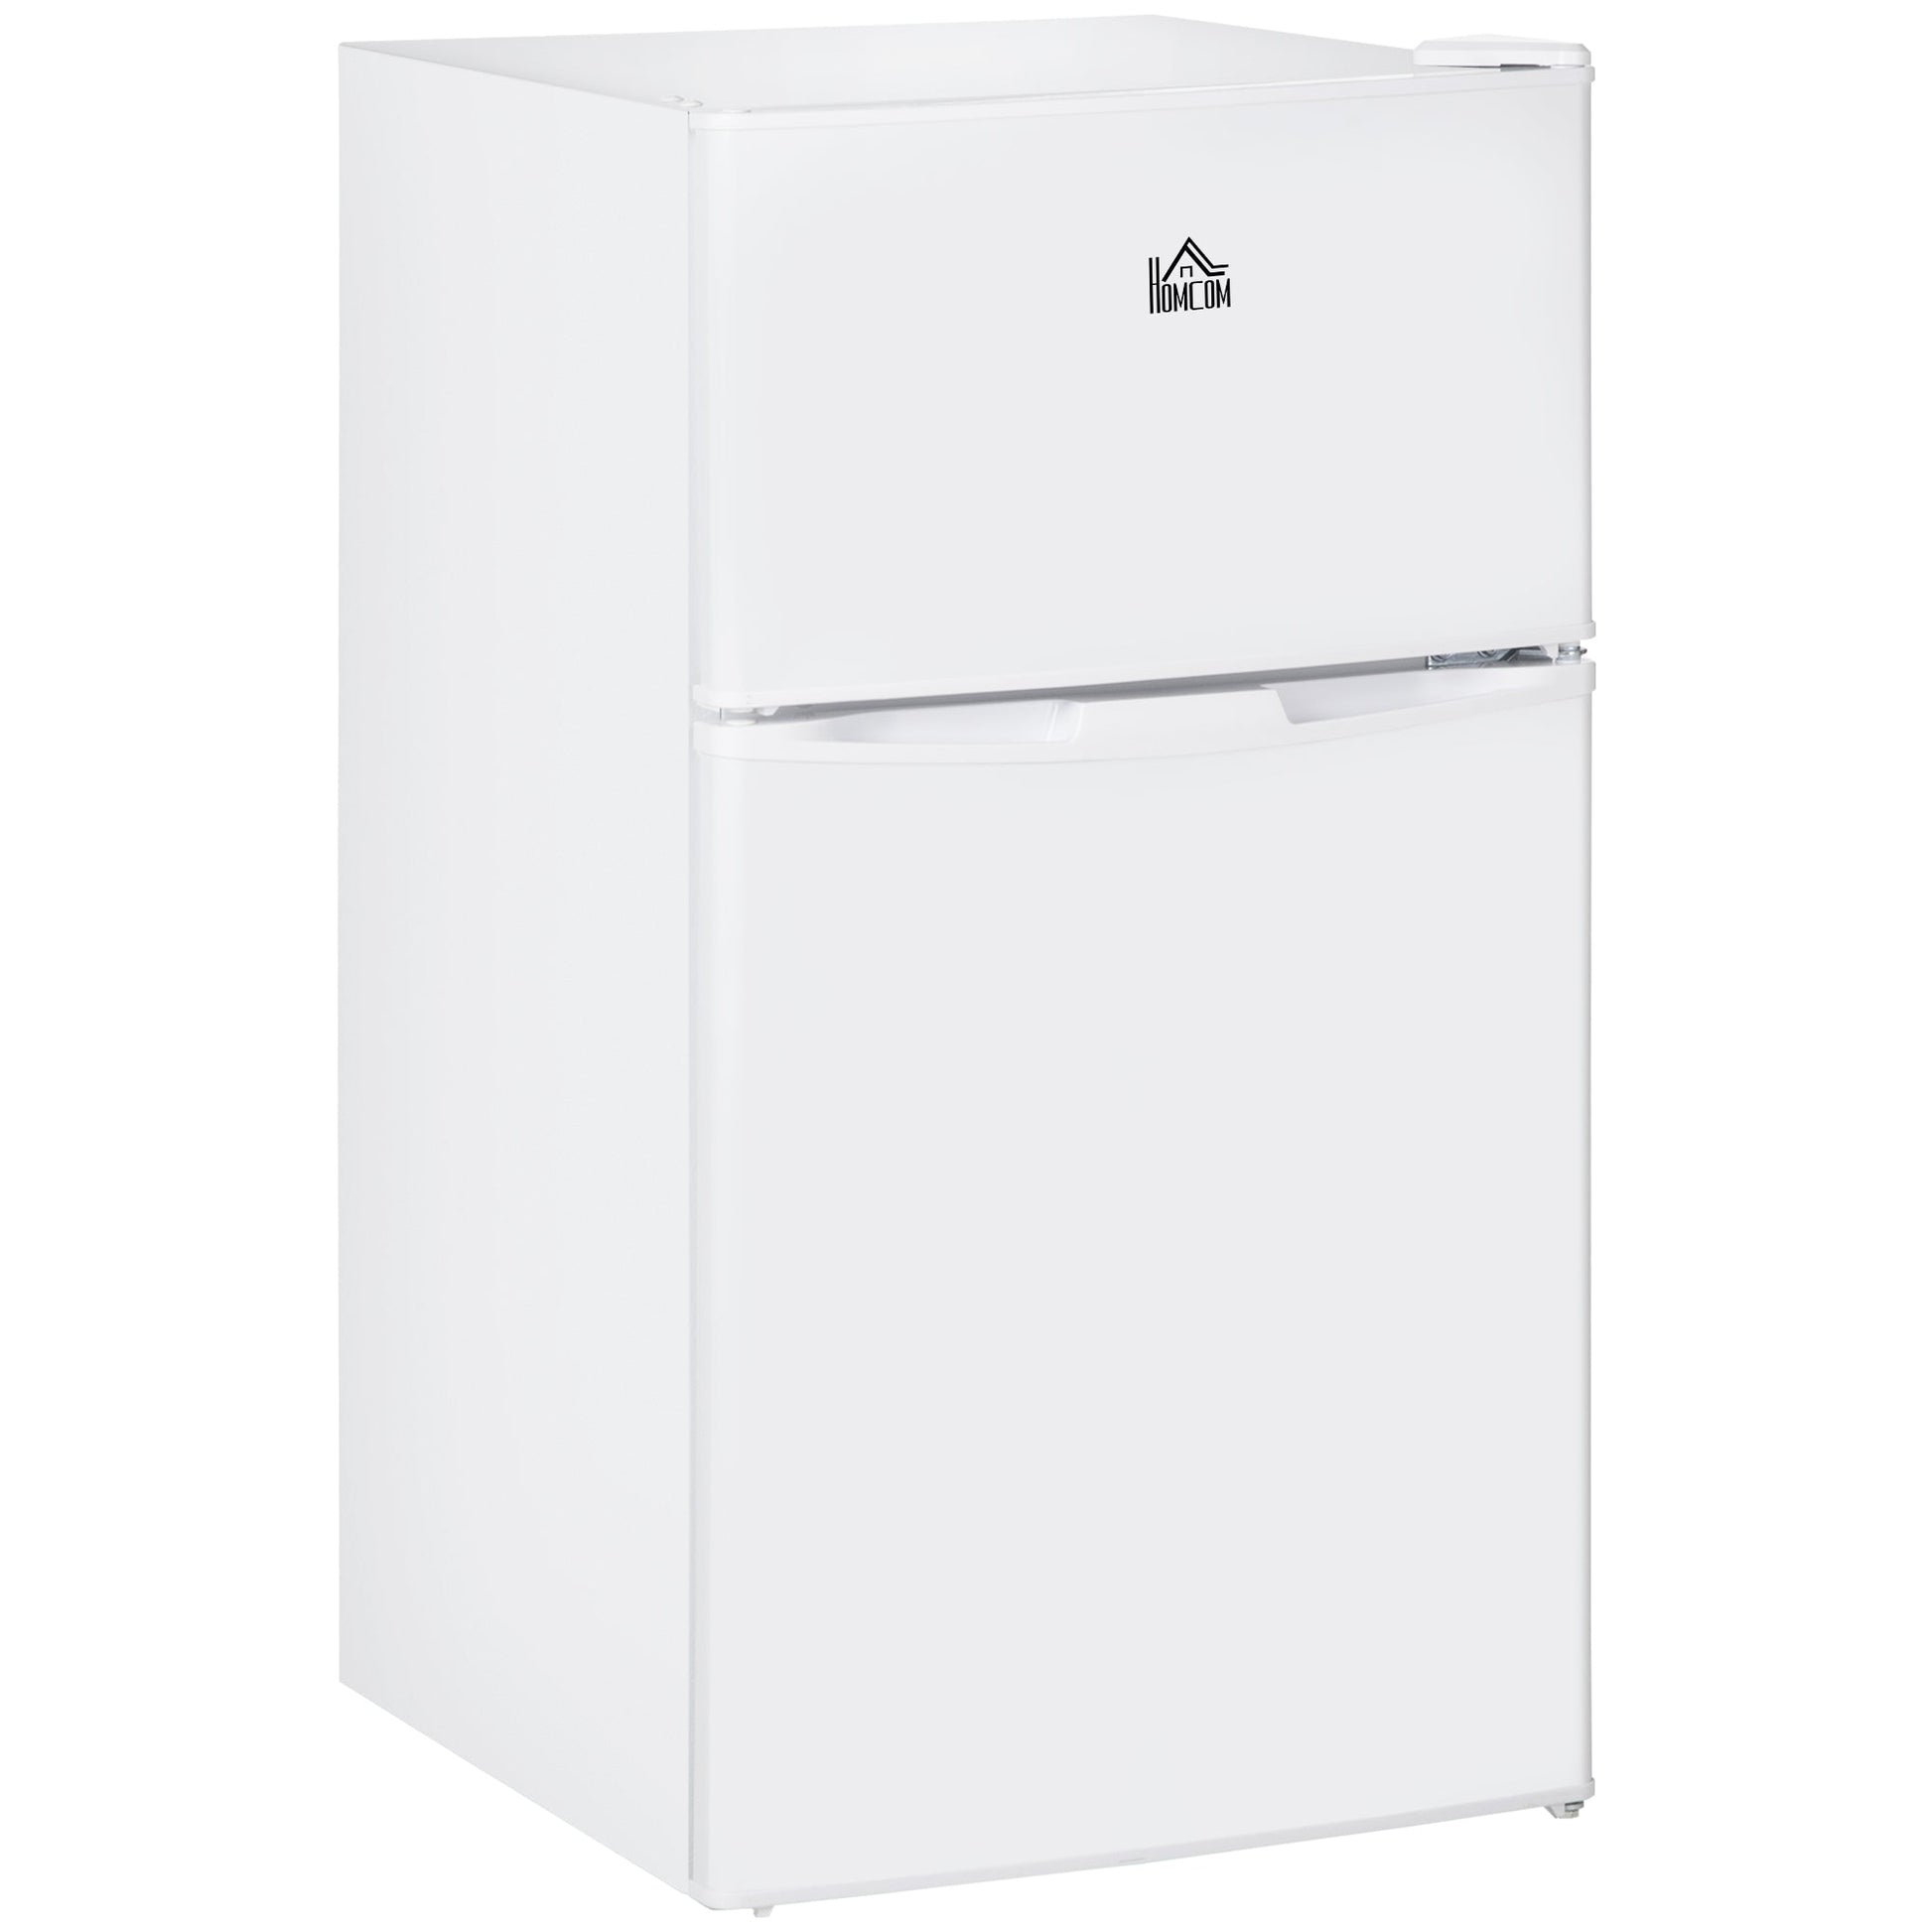 Double Door Mini Fridge with Freezer, 3.2 Cu.Ft Compact Refrigerator with Adjustable Shelf, Mechanical Thermostat and Reversible Door for Bedroom, Dorm, Home Office, White - Gallery Canada